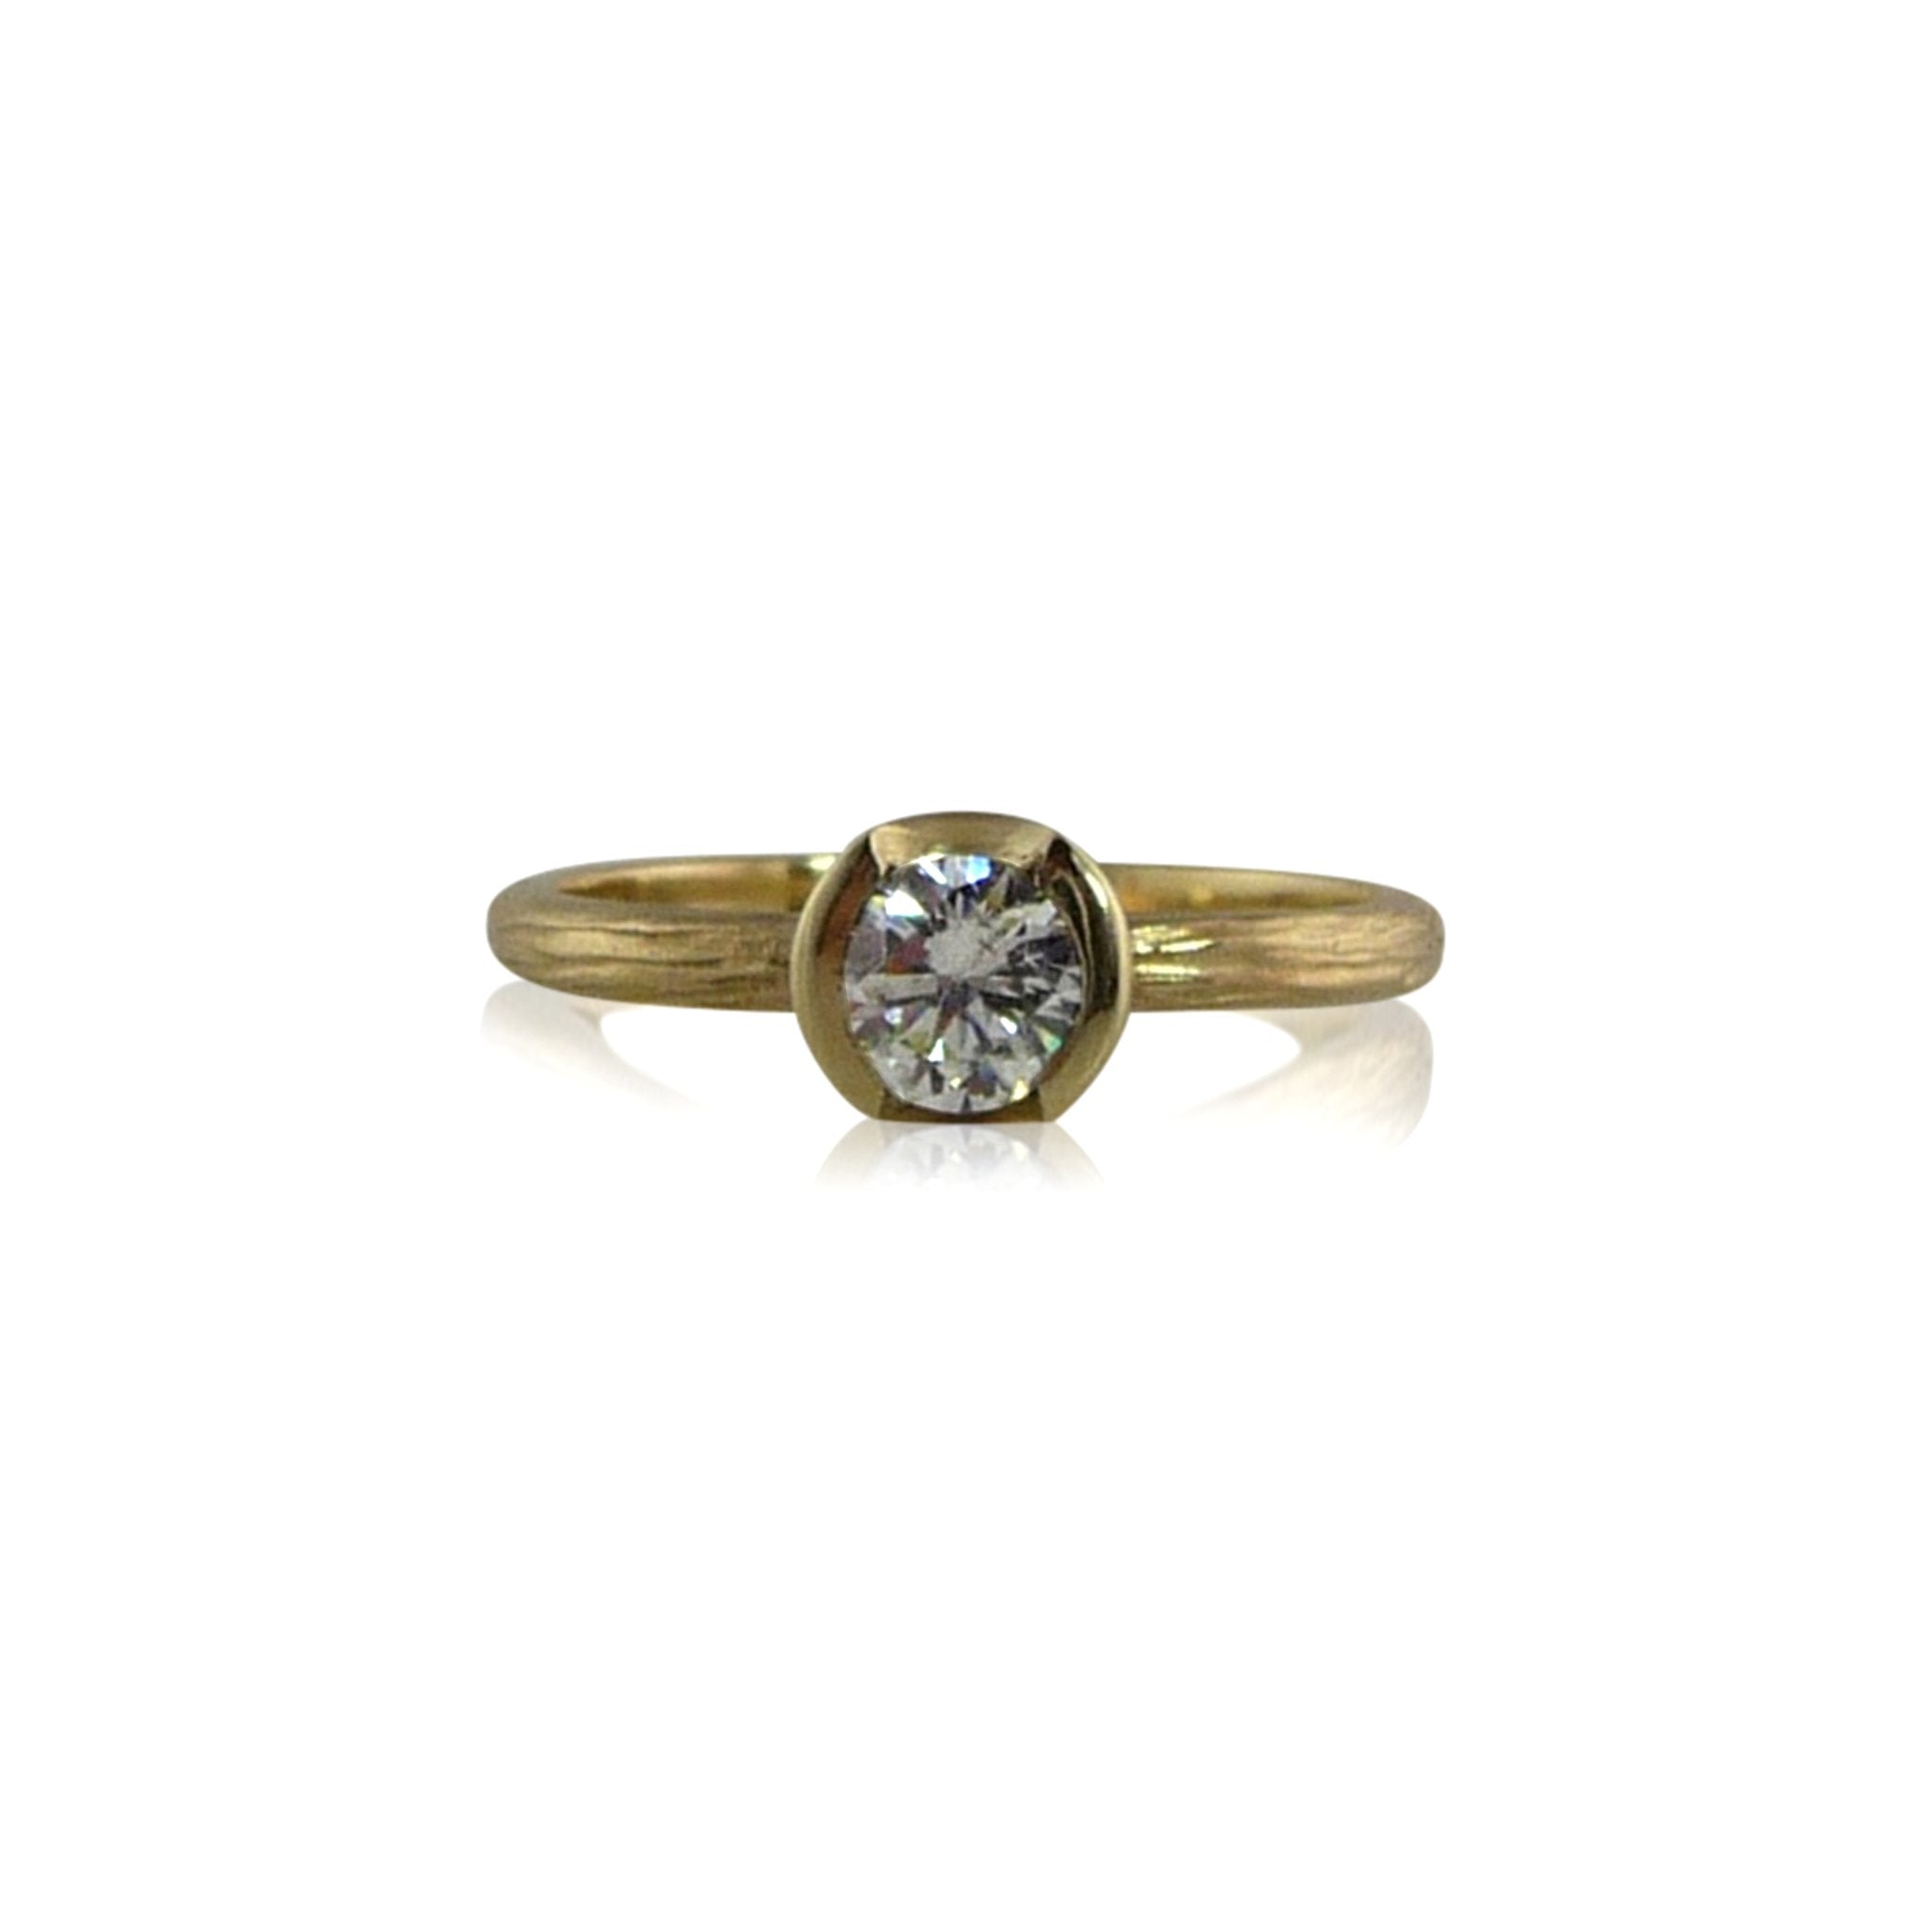 Sequoia Solitaire Gold Diamond Engagement Ring